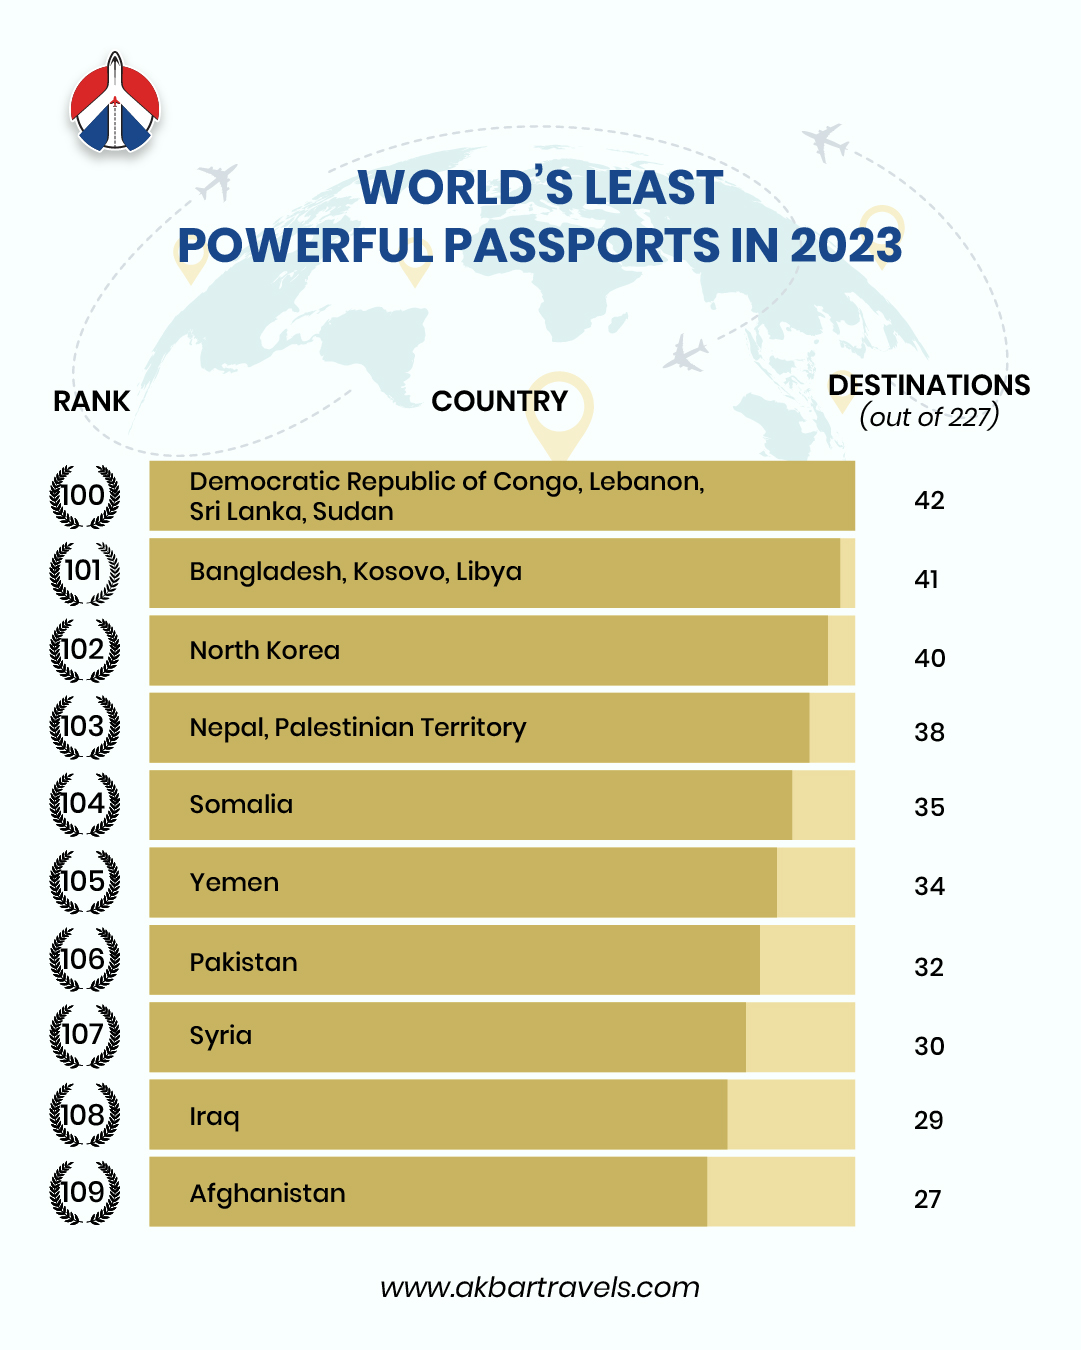 10 Least Powerful Passports in 2023